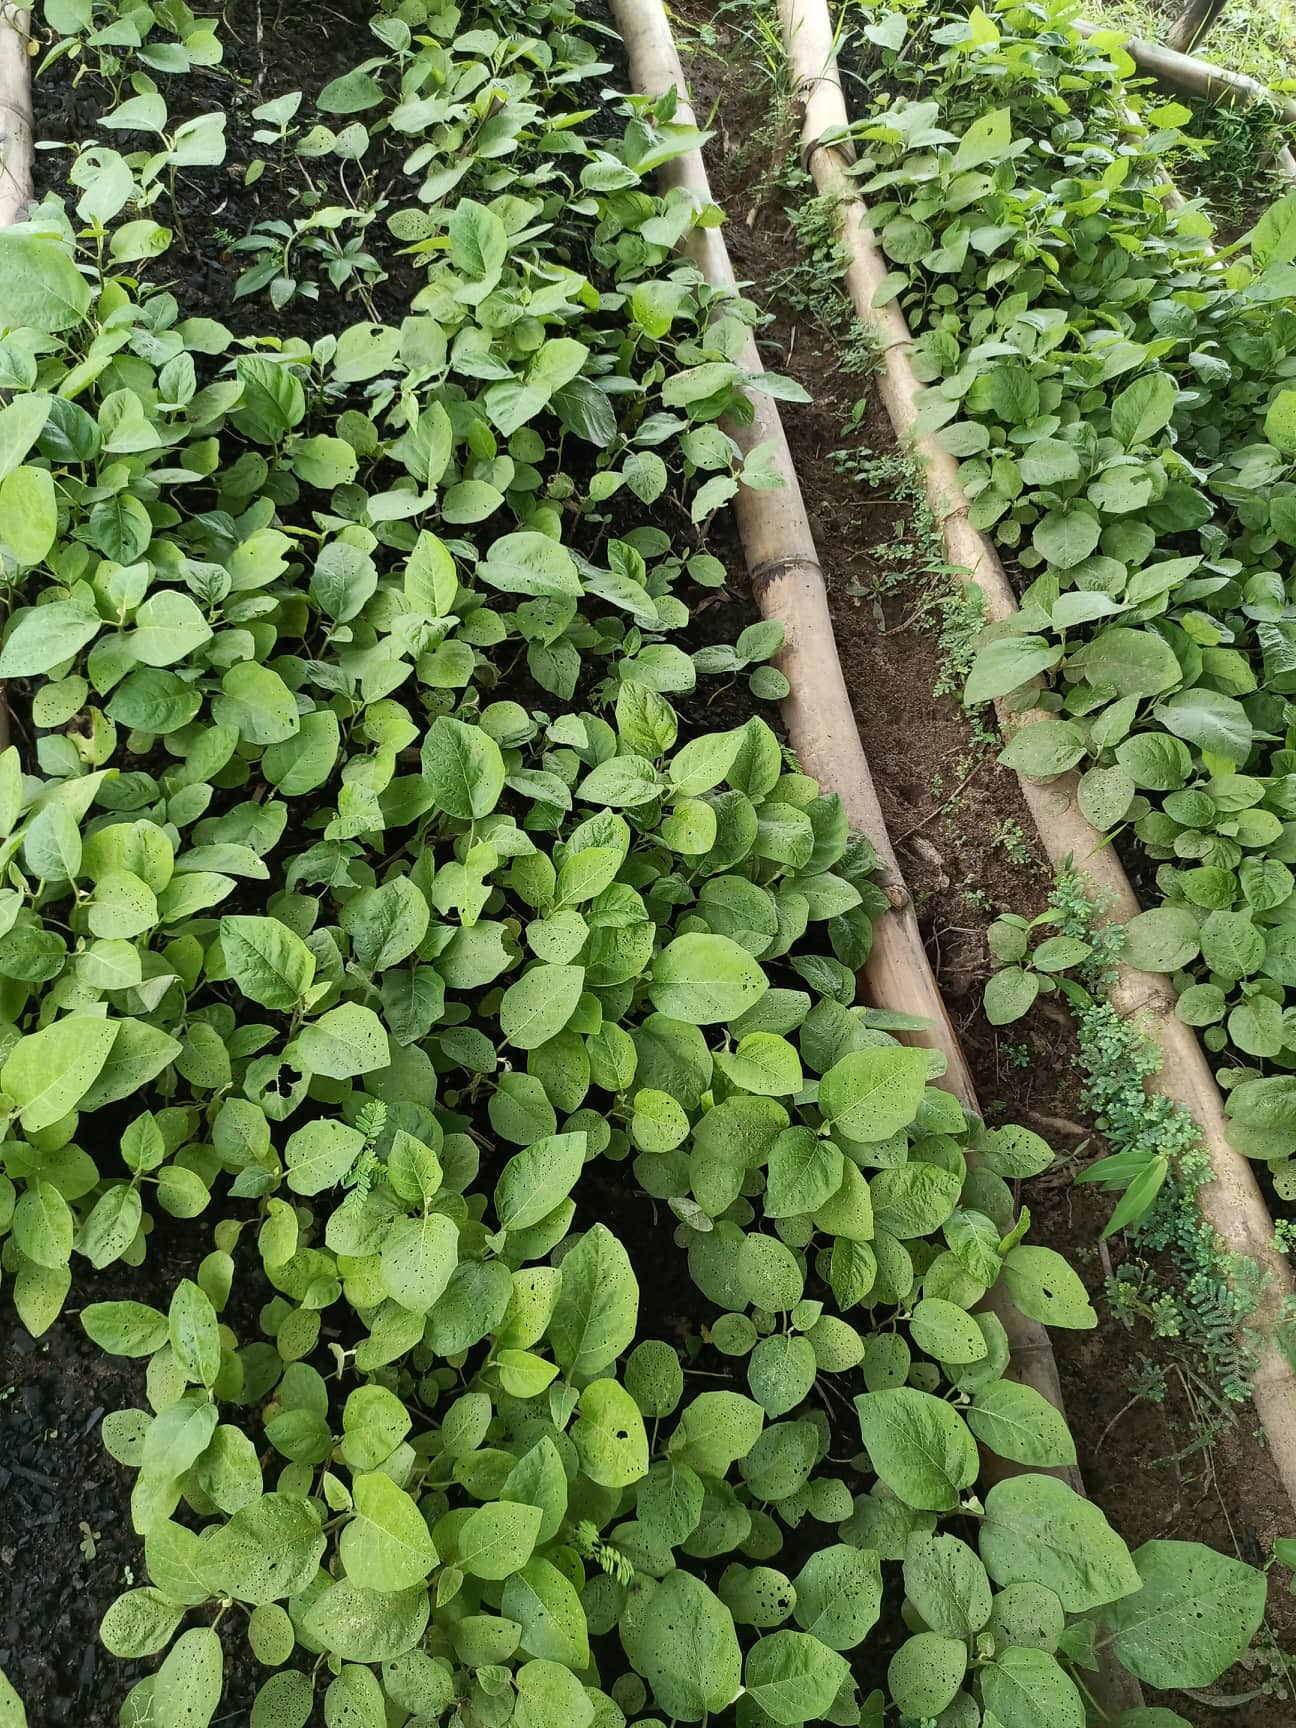 Pepper Seedlings on Nursery Bed are ready for transplanting.